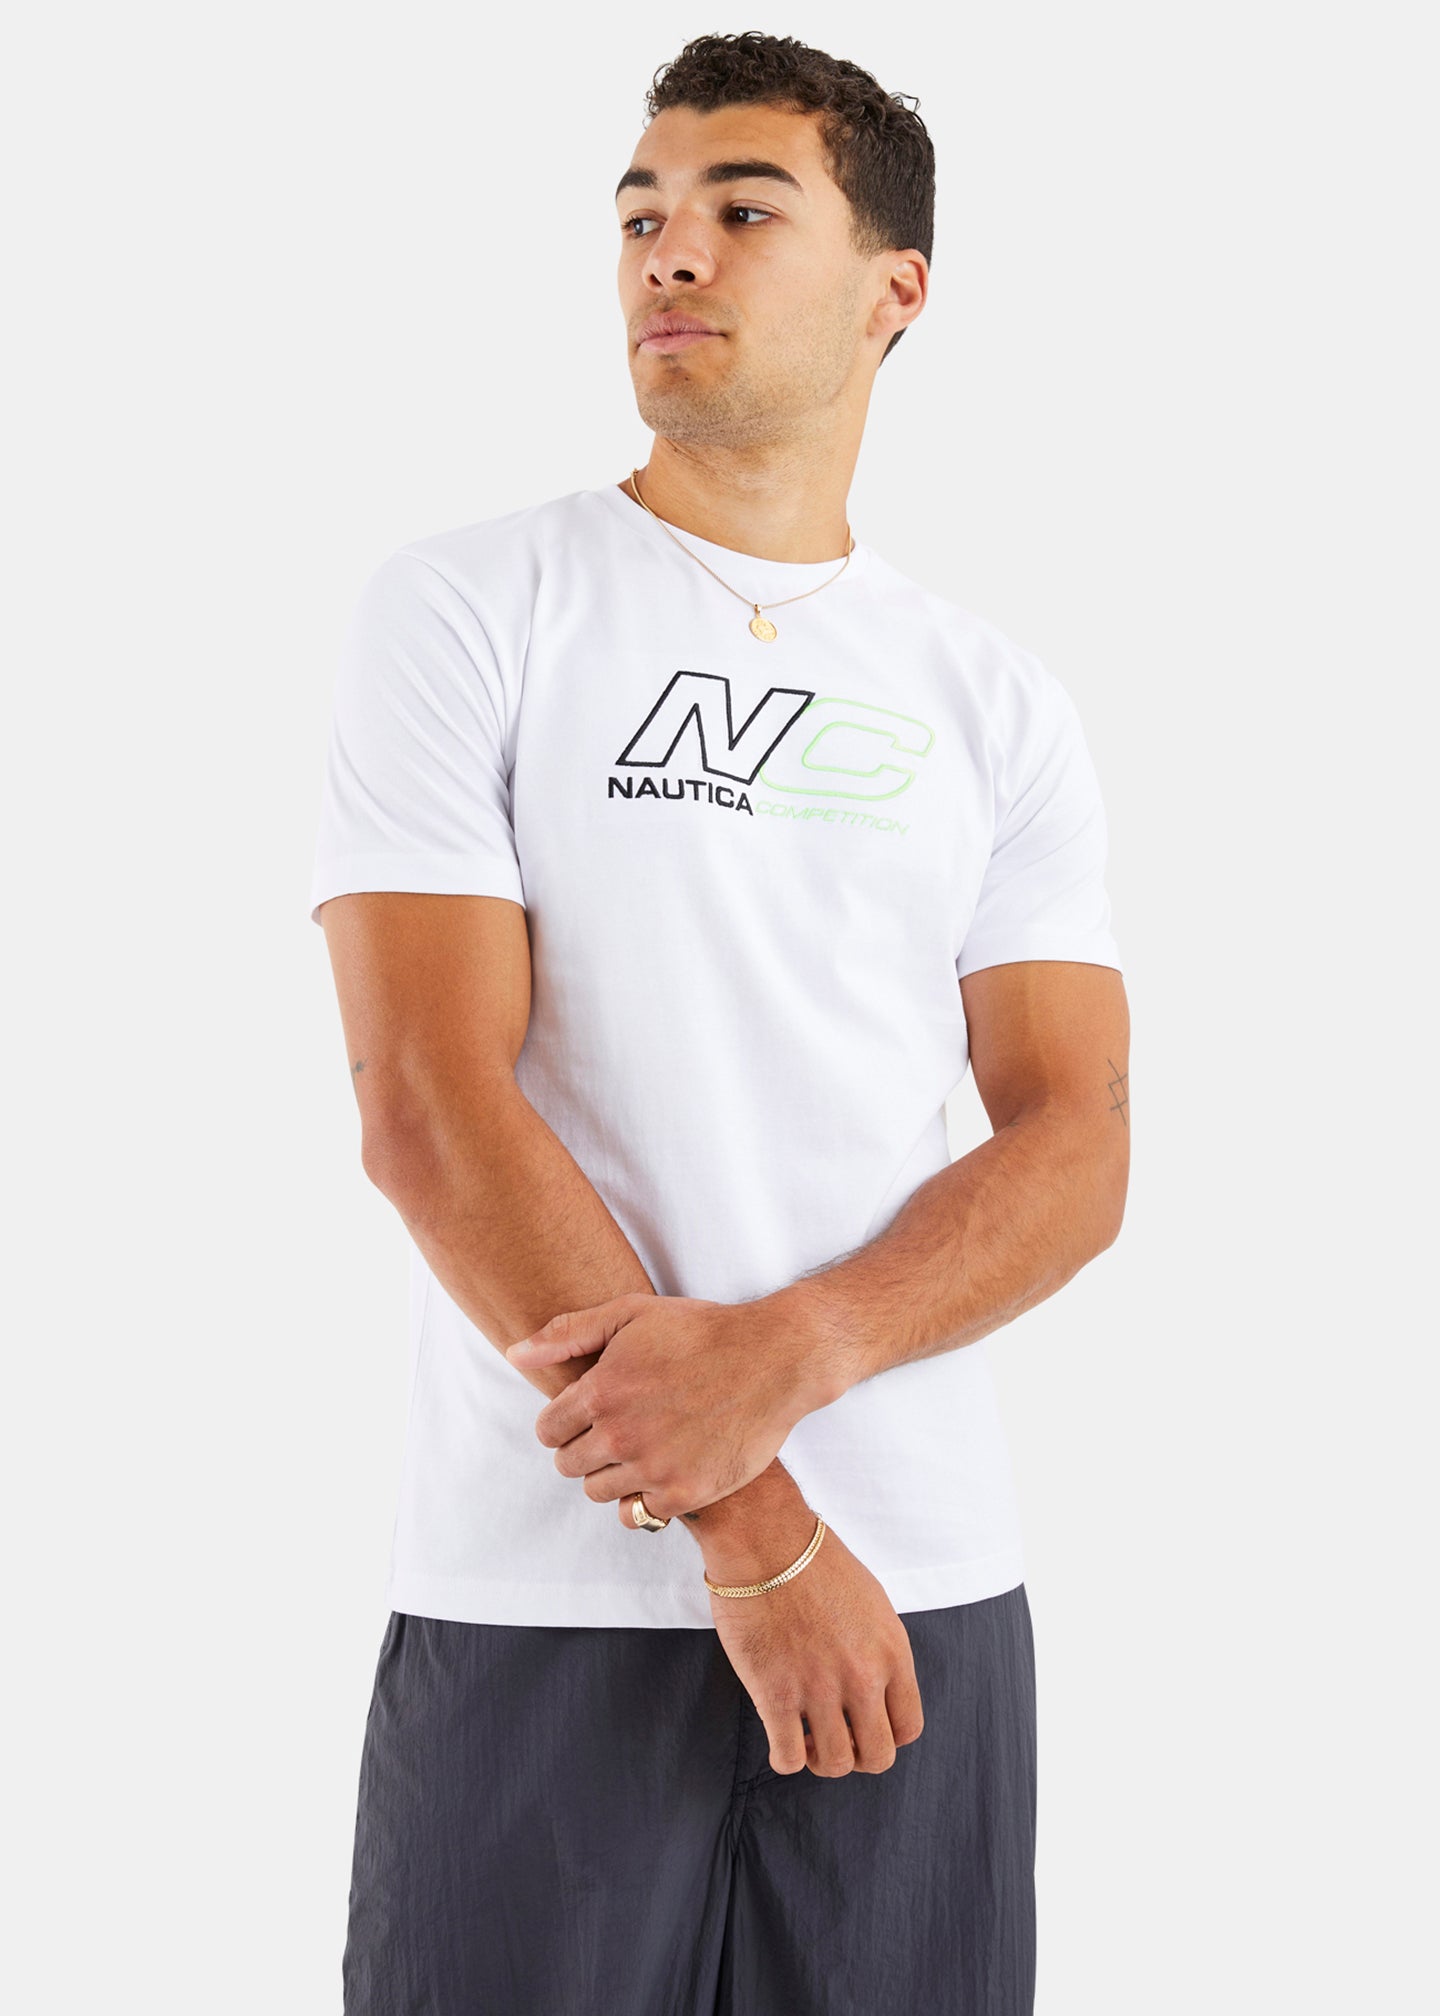 Nautica Competition Dirk T - Shirt - White - Front